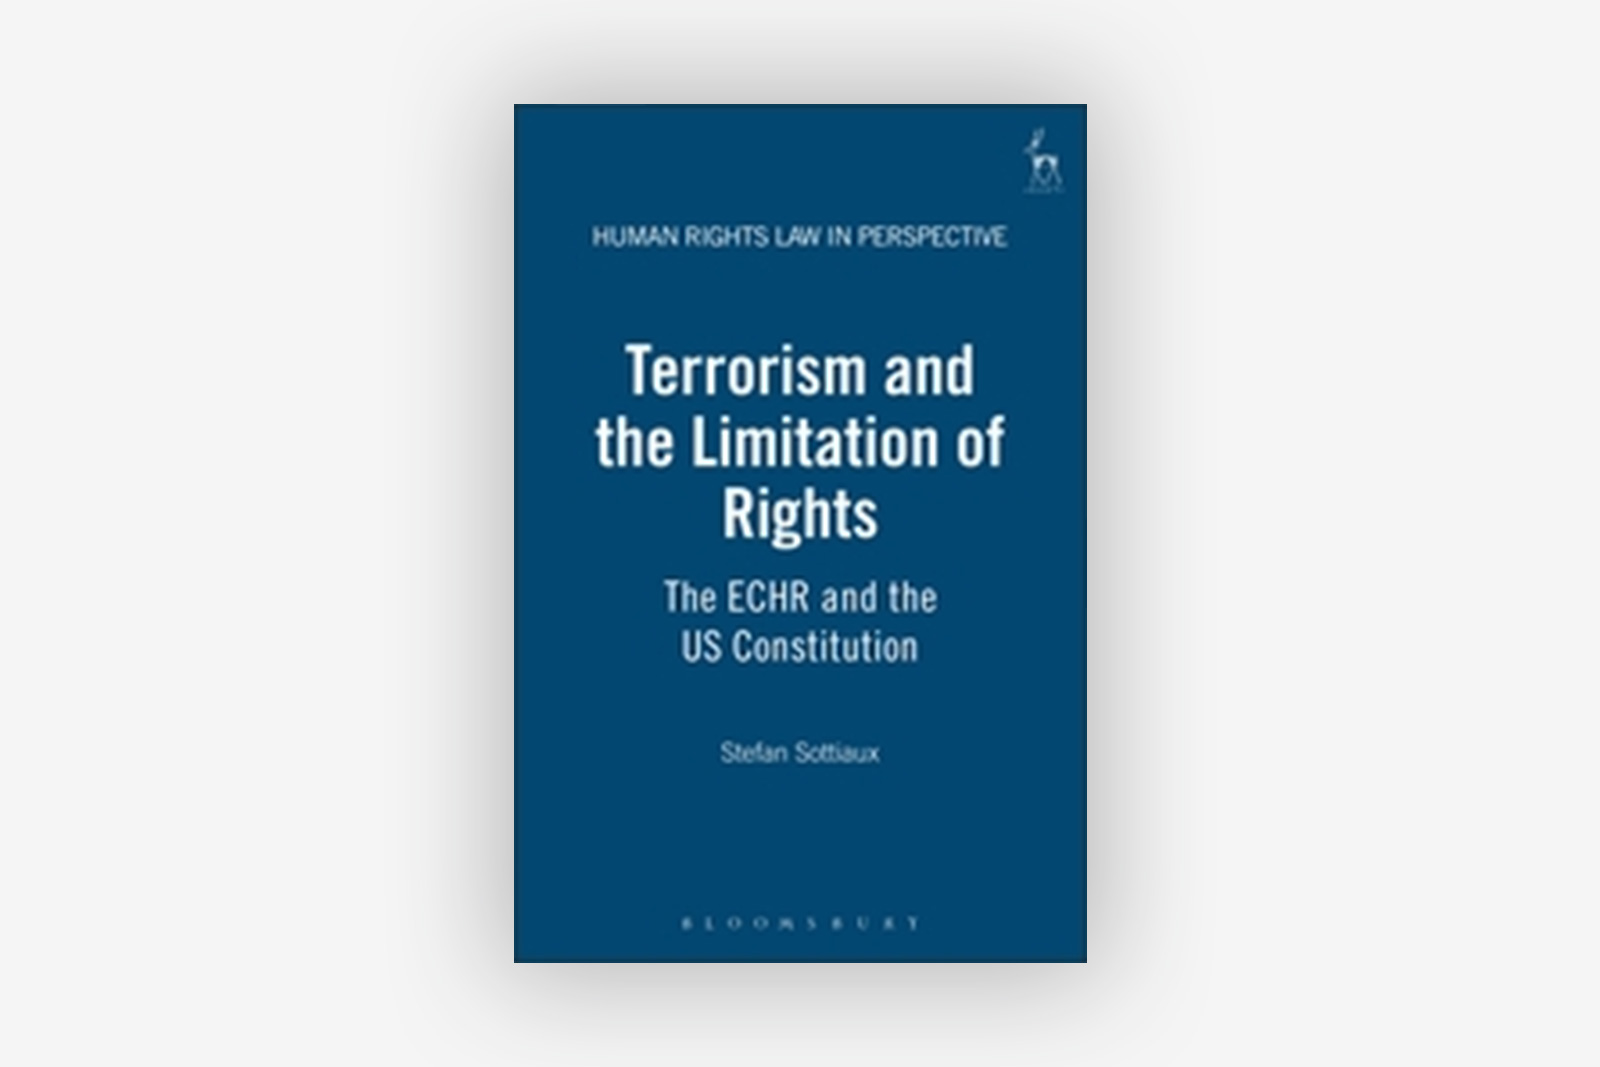 Terrorism and the Limitation of Rights (2008)